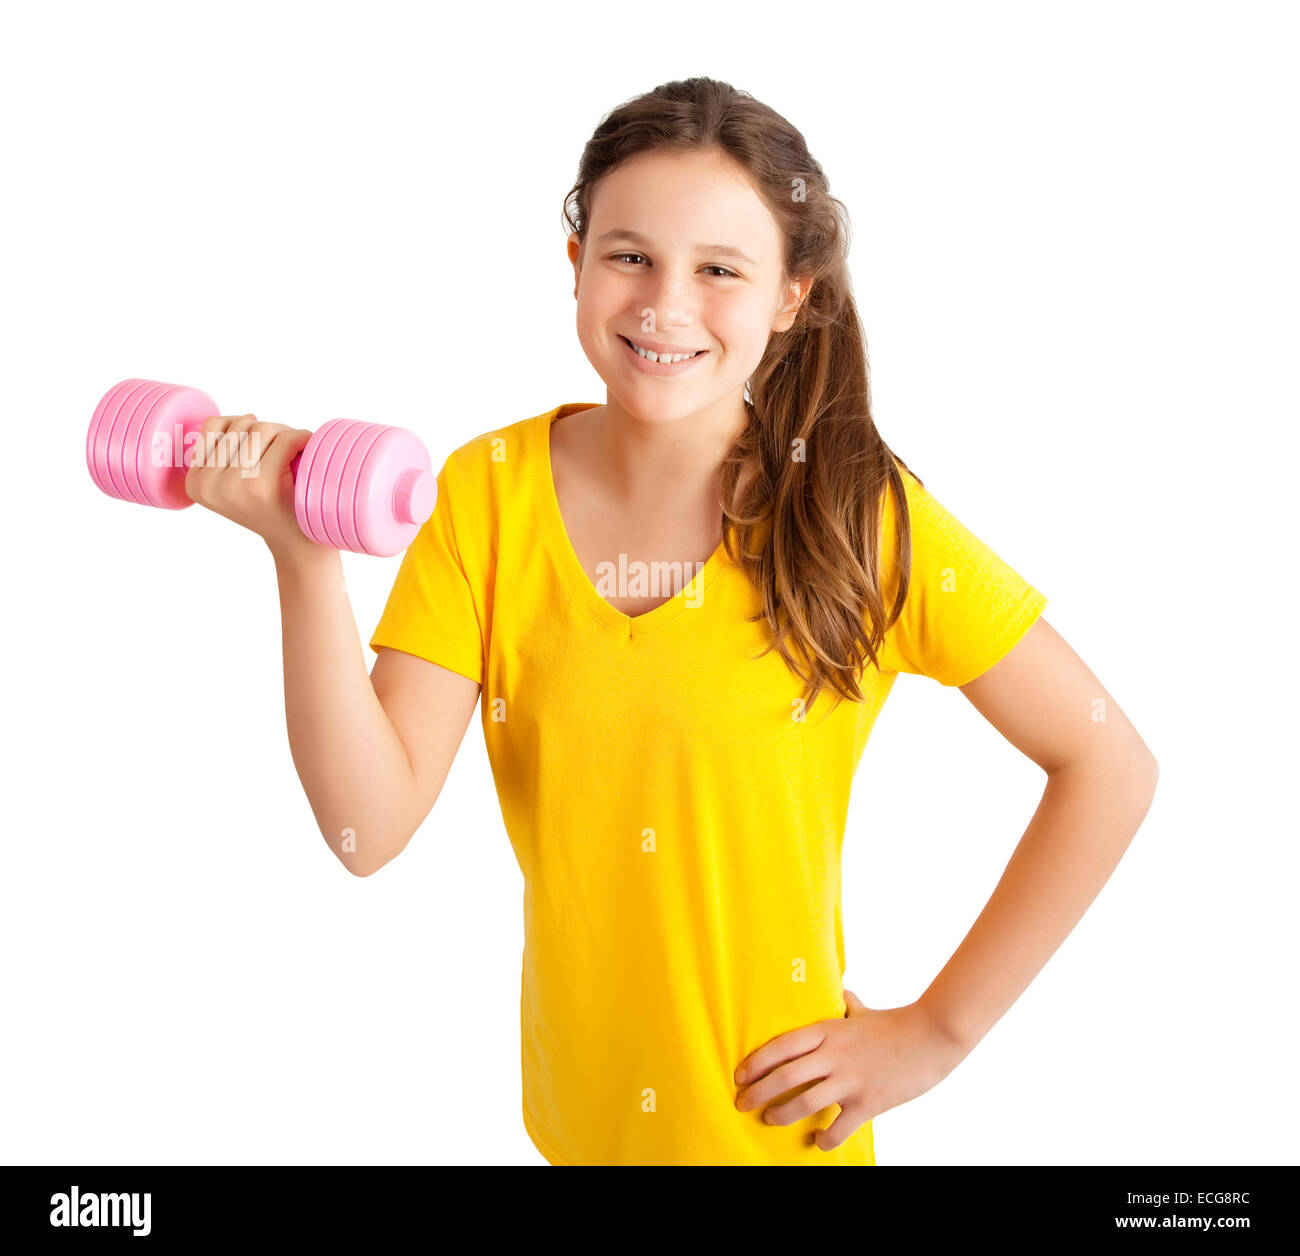 young girl with dumbbell Stock Photo